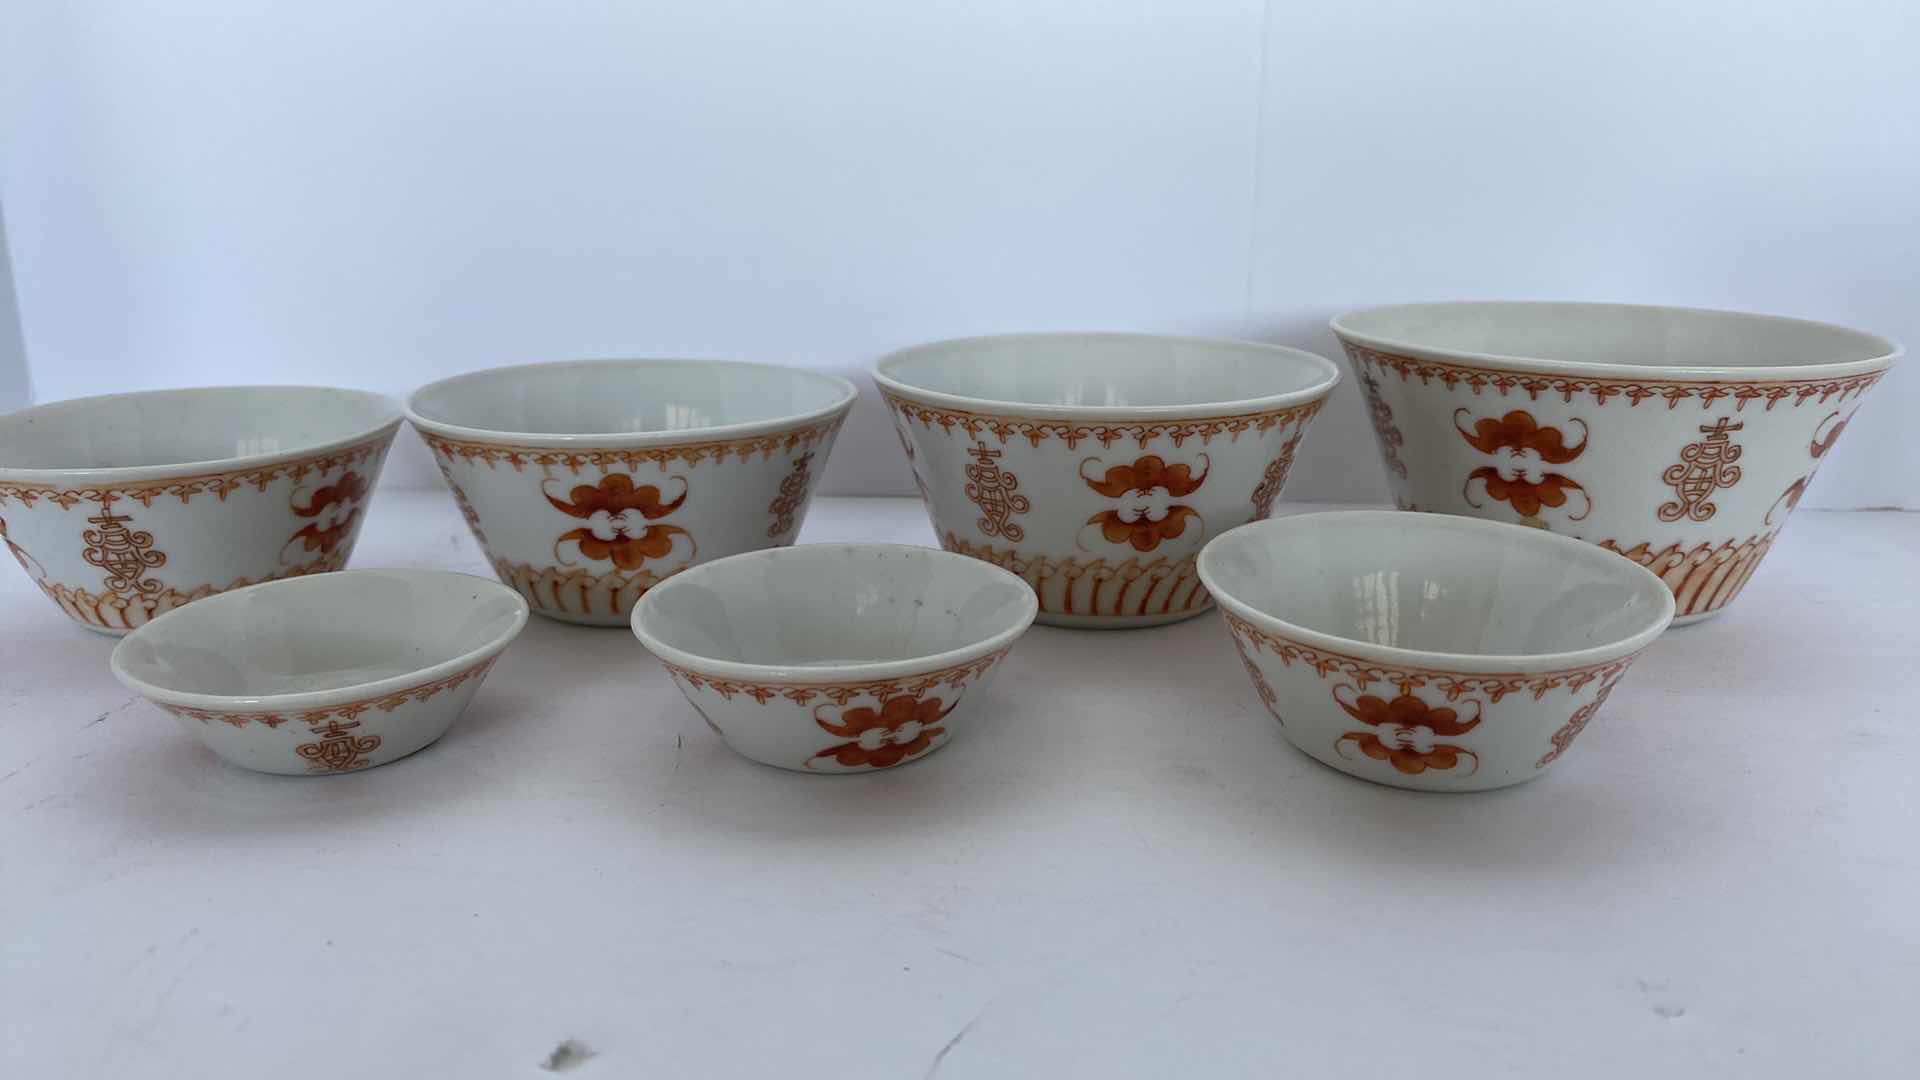 Photo 2 of CHINESE SMALL NESTING BOWLS AND VASE 4.25”